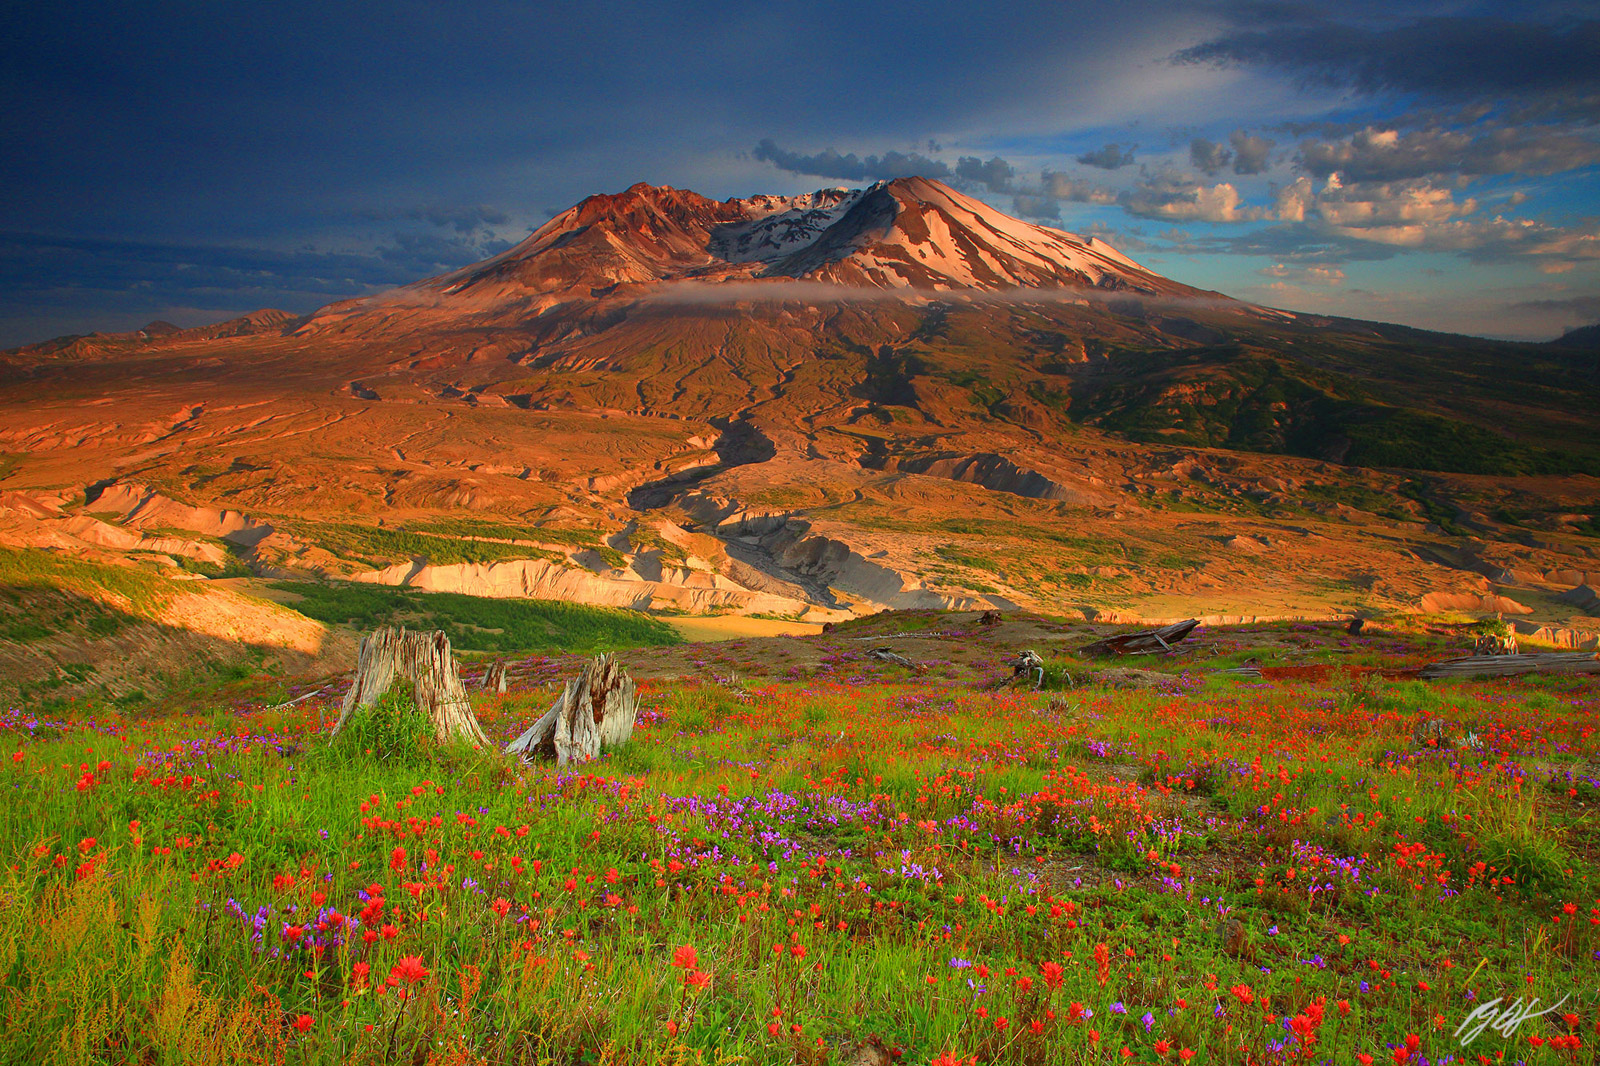 Evening Light with Wildflowers and Mt St Helens from Johnston Ridge in Mt St Helens Volcanic National Monument in Washington